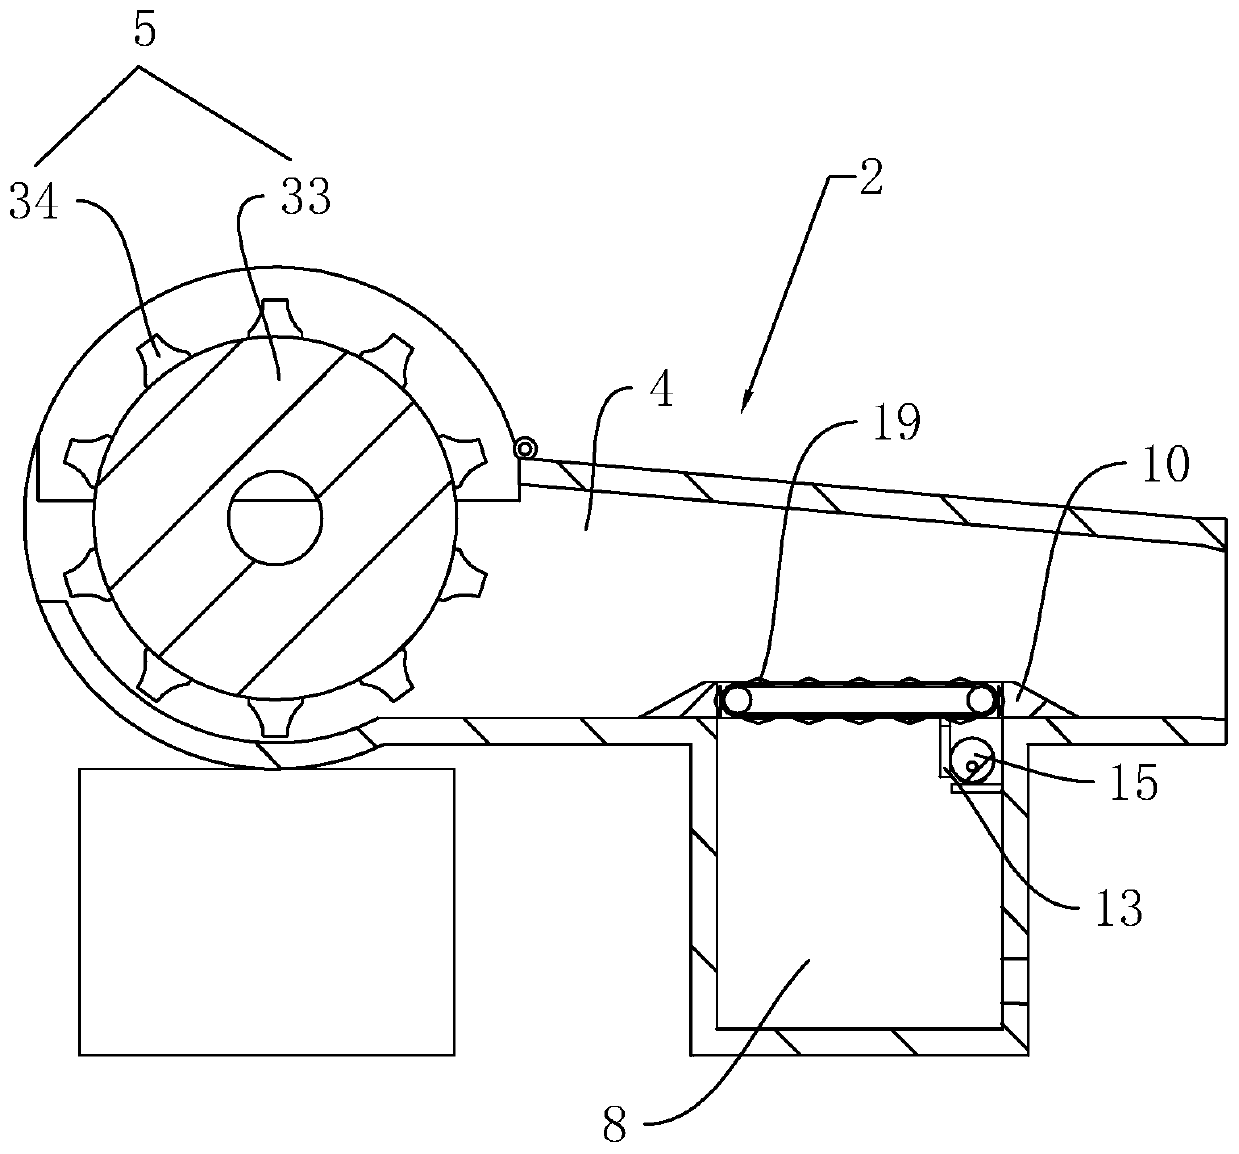 Cotton carding scattering device for home textiles and cotton carding process applying the scattering device